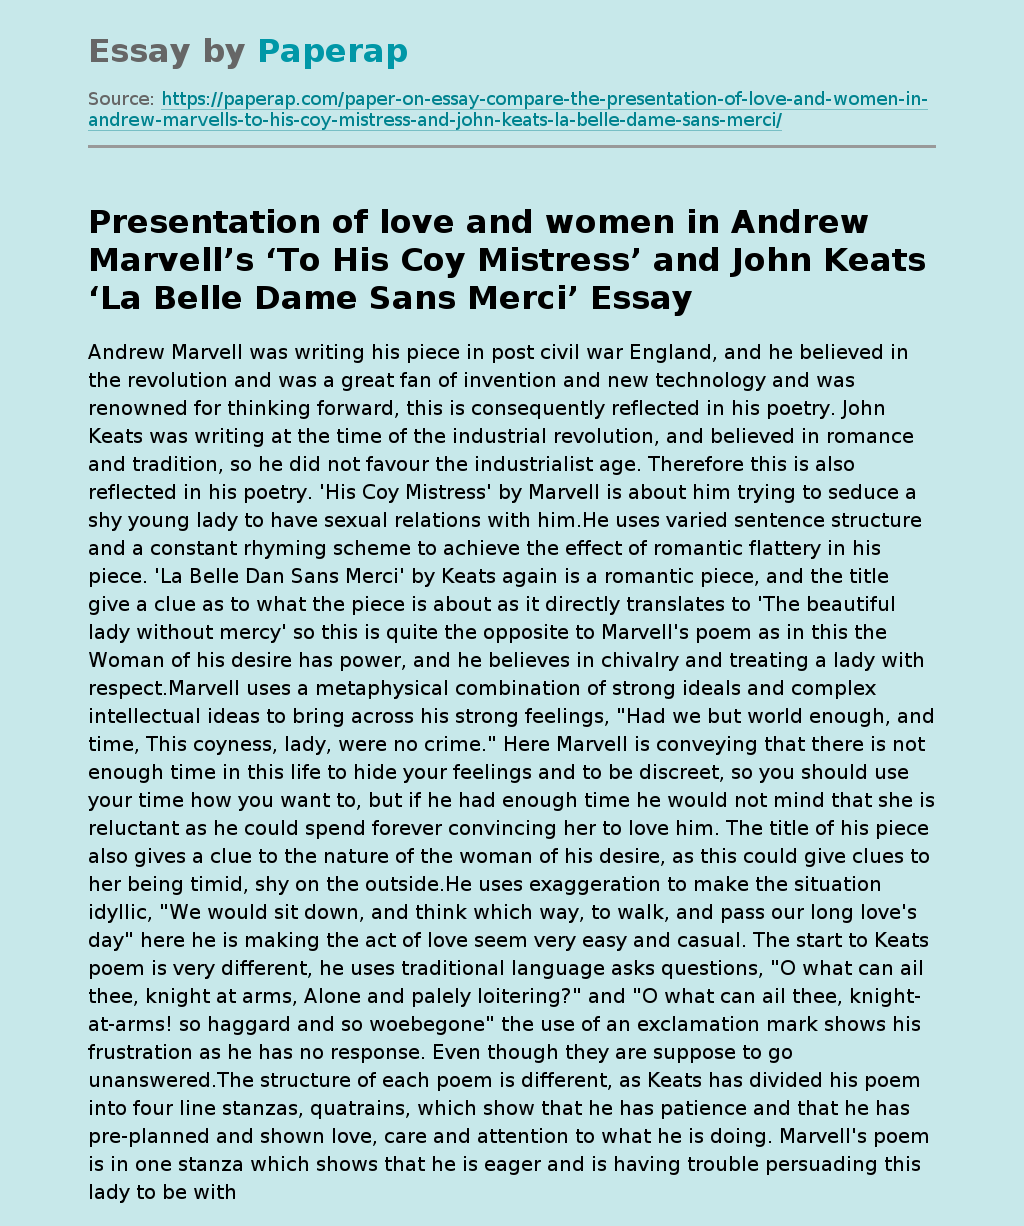 Presentation of love and women in Andrew Marvell’s ‘To His Coy Mistress’ and John Keats ‘La Belle Dame Sans Merci’